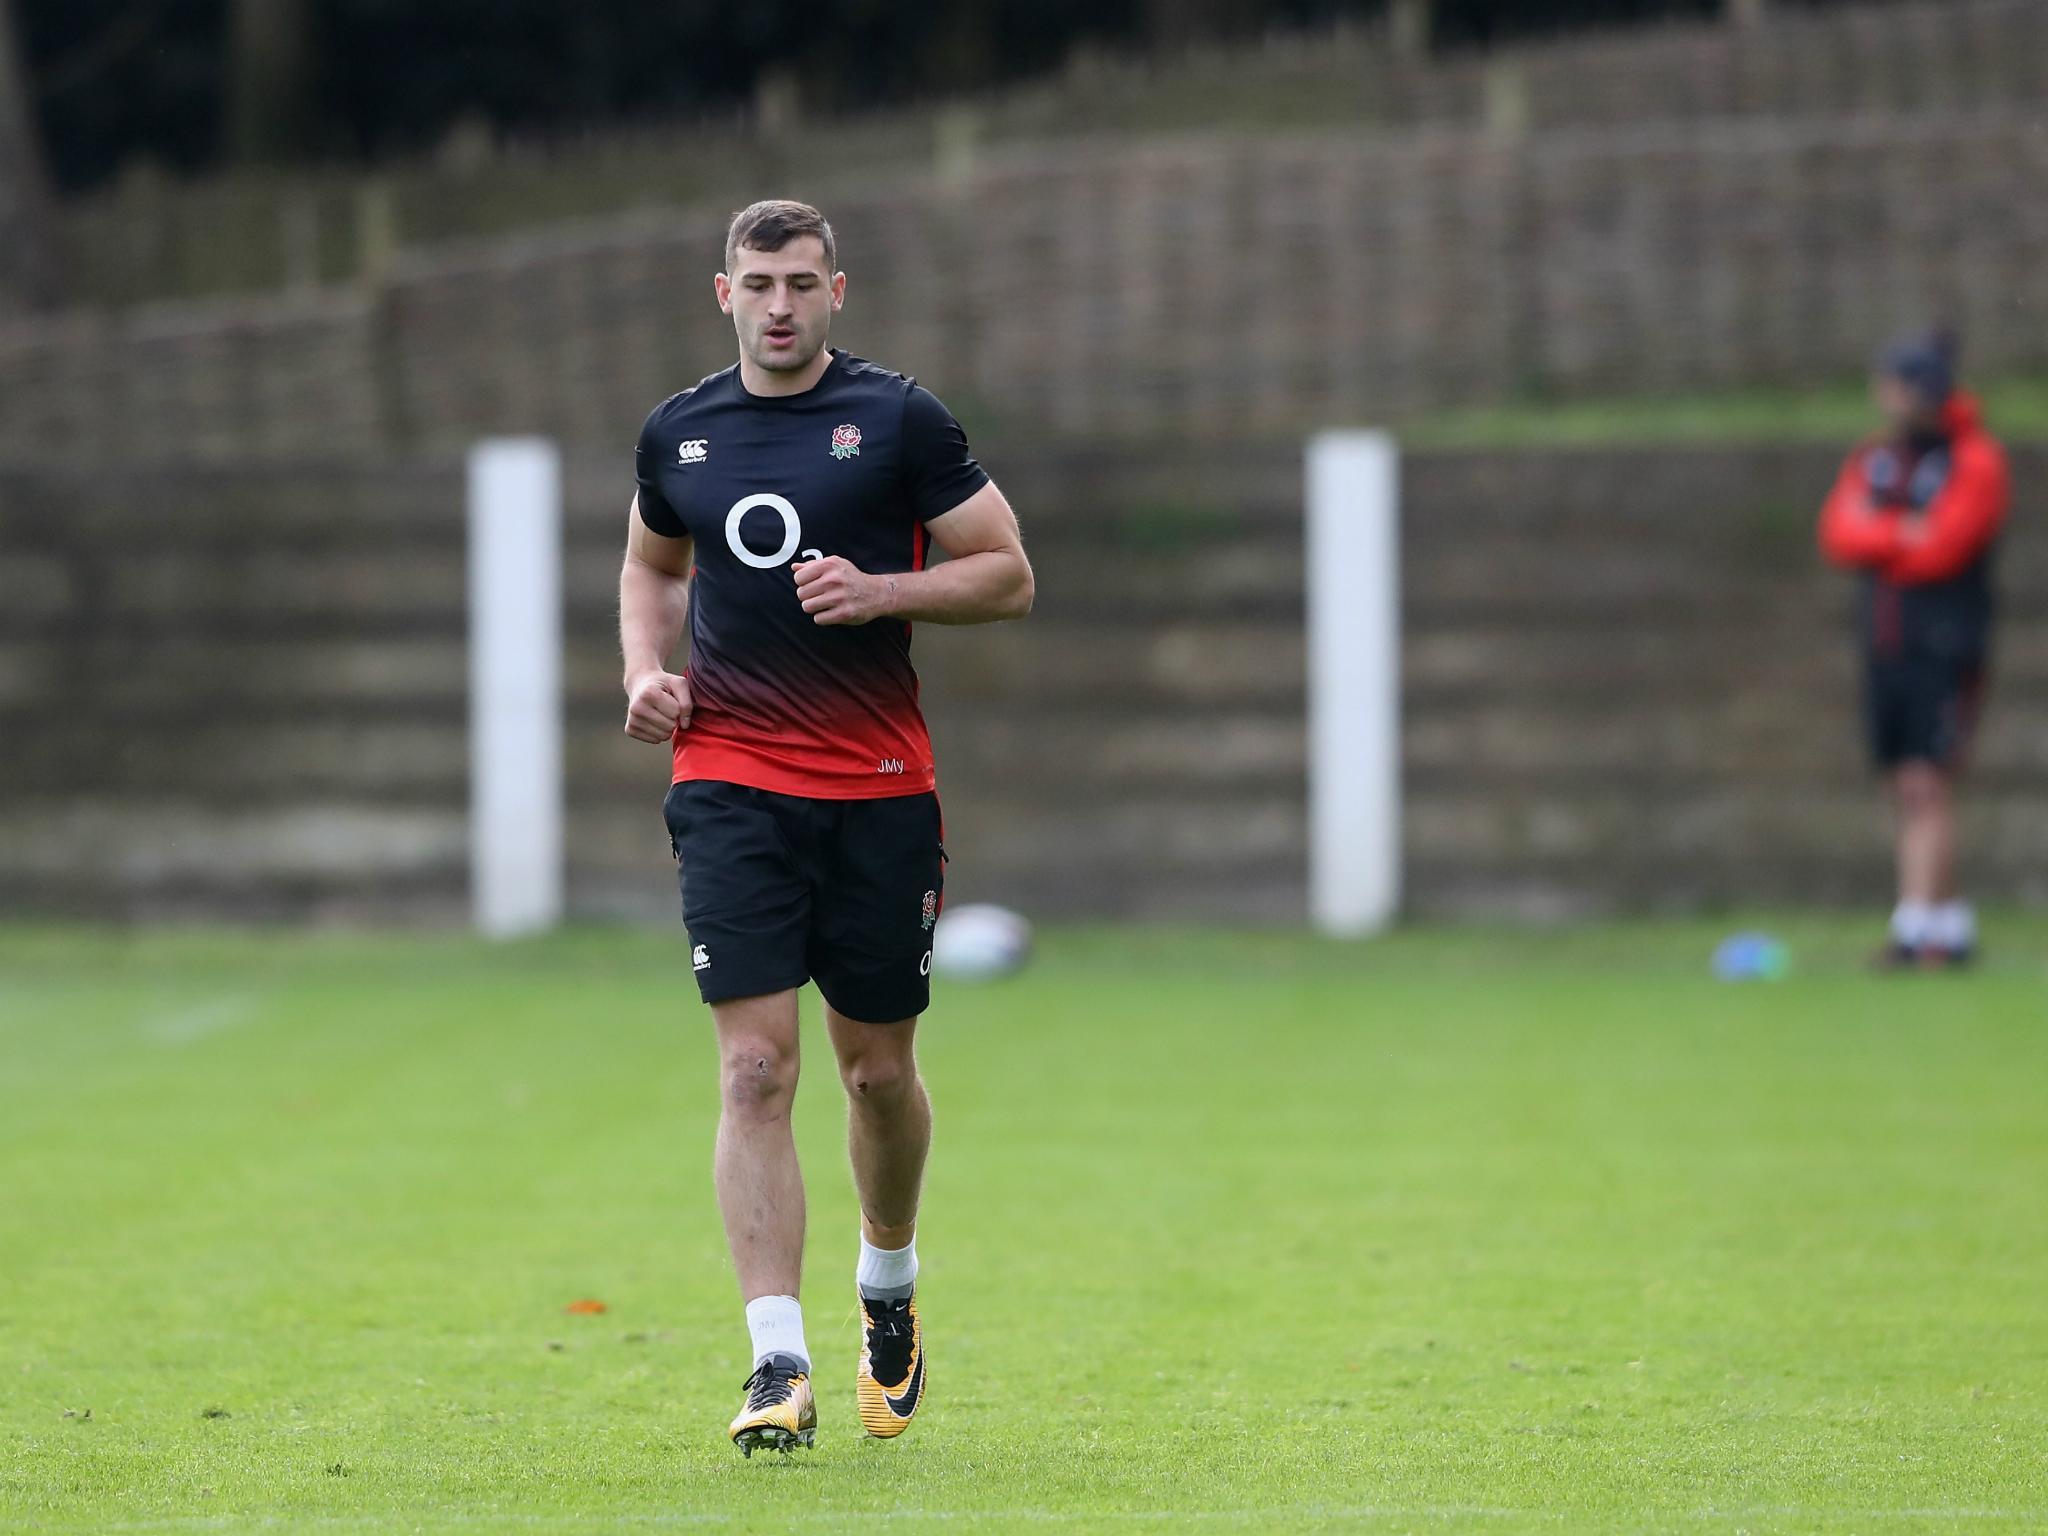 Jonny May will return for England this Saturday after recovering from a hamstring injury